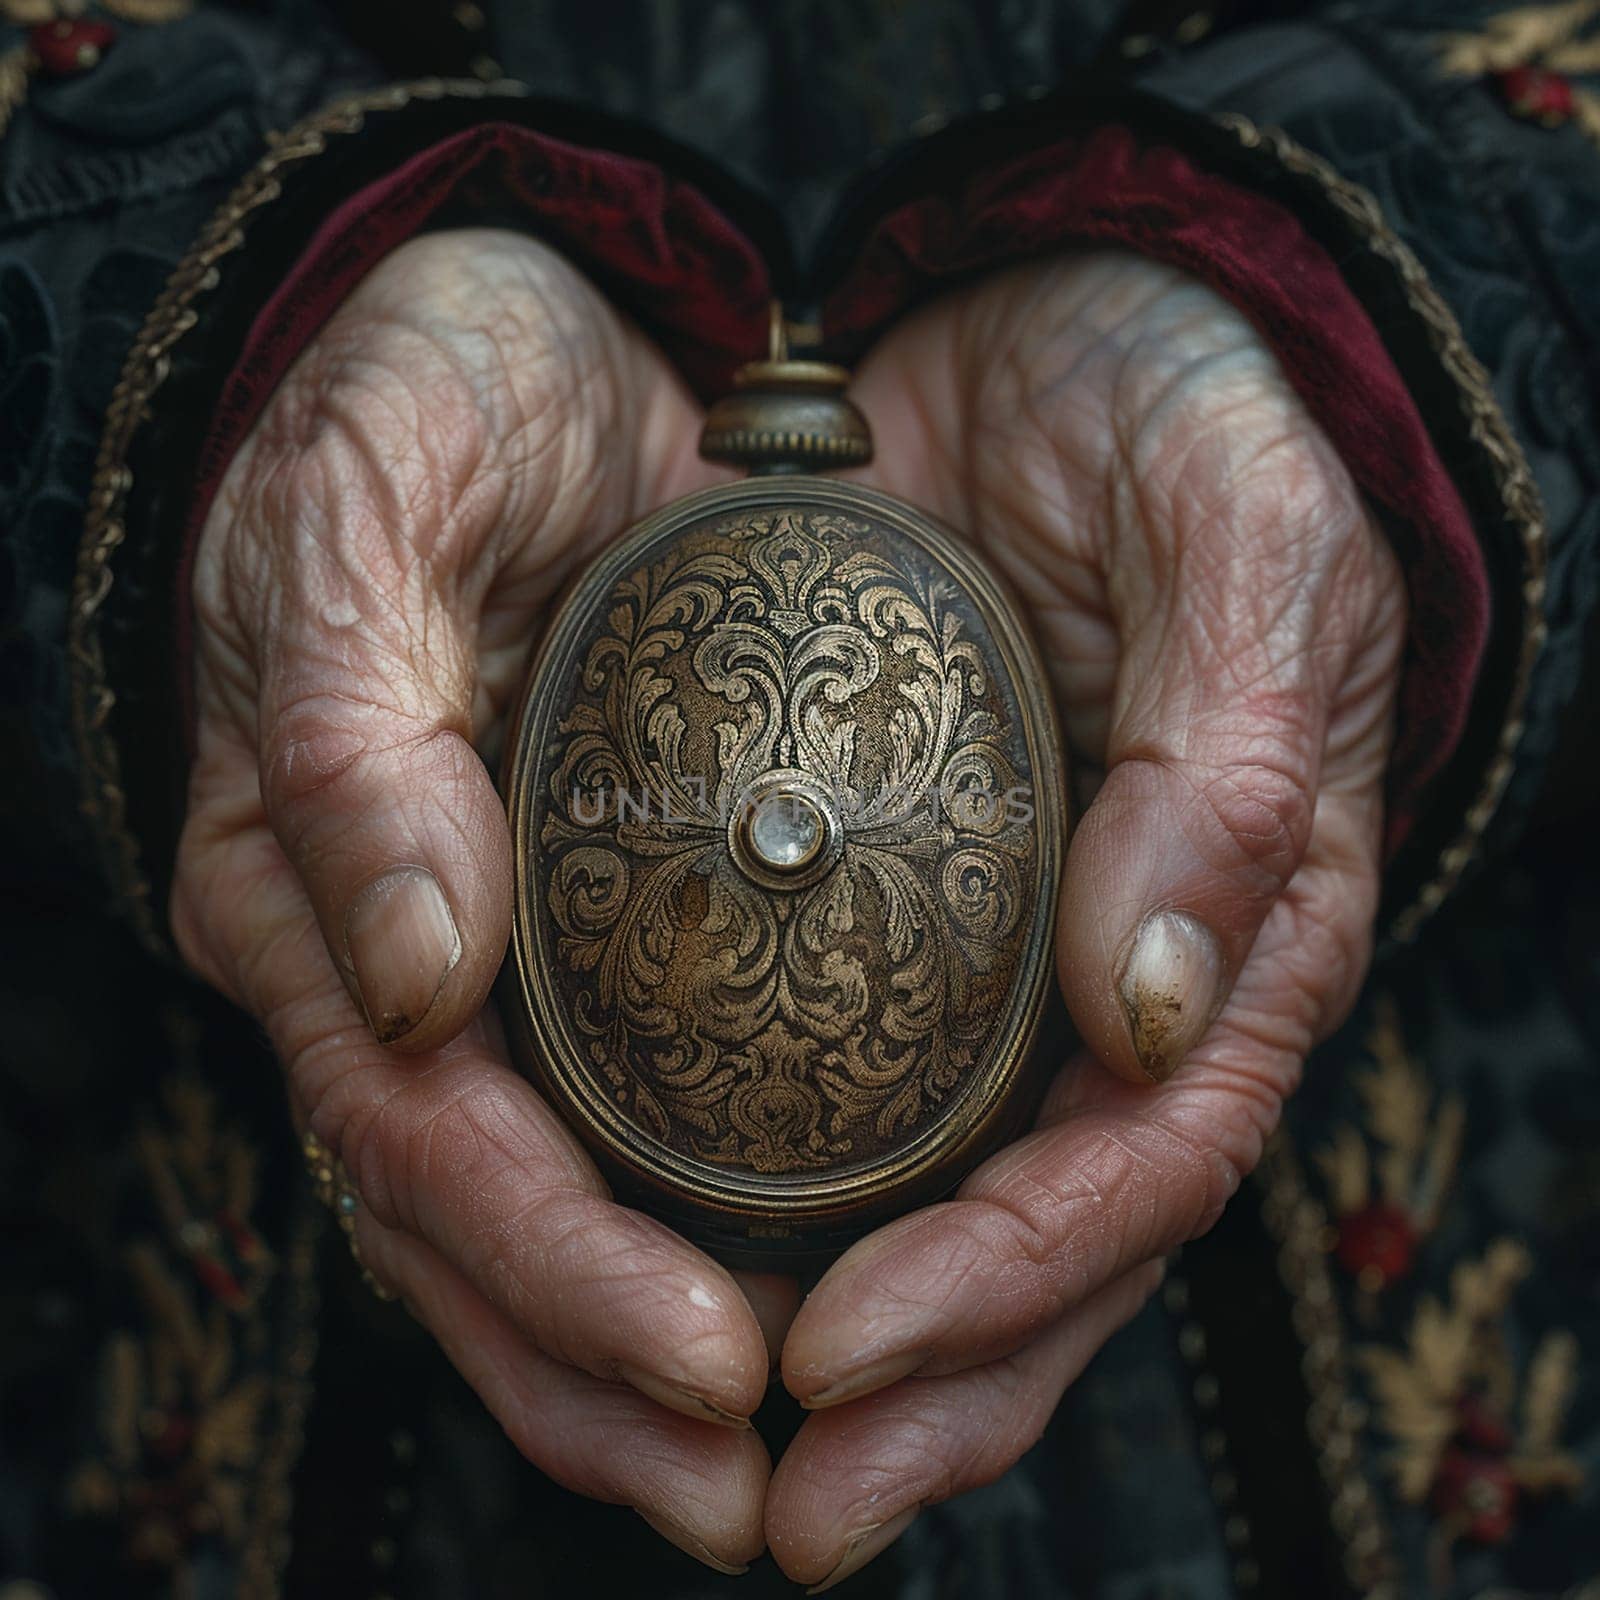 Fingers clutching a locket, evoking personal history, memory, and sentimental value.